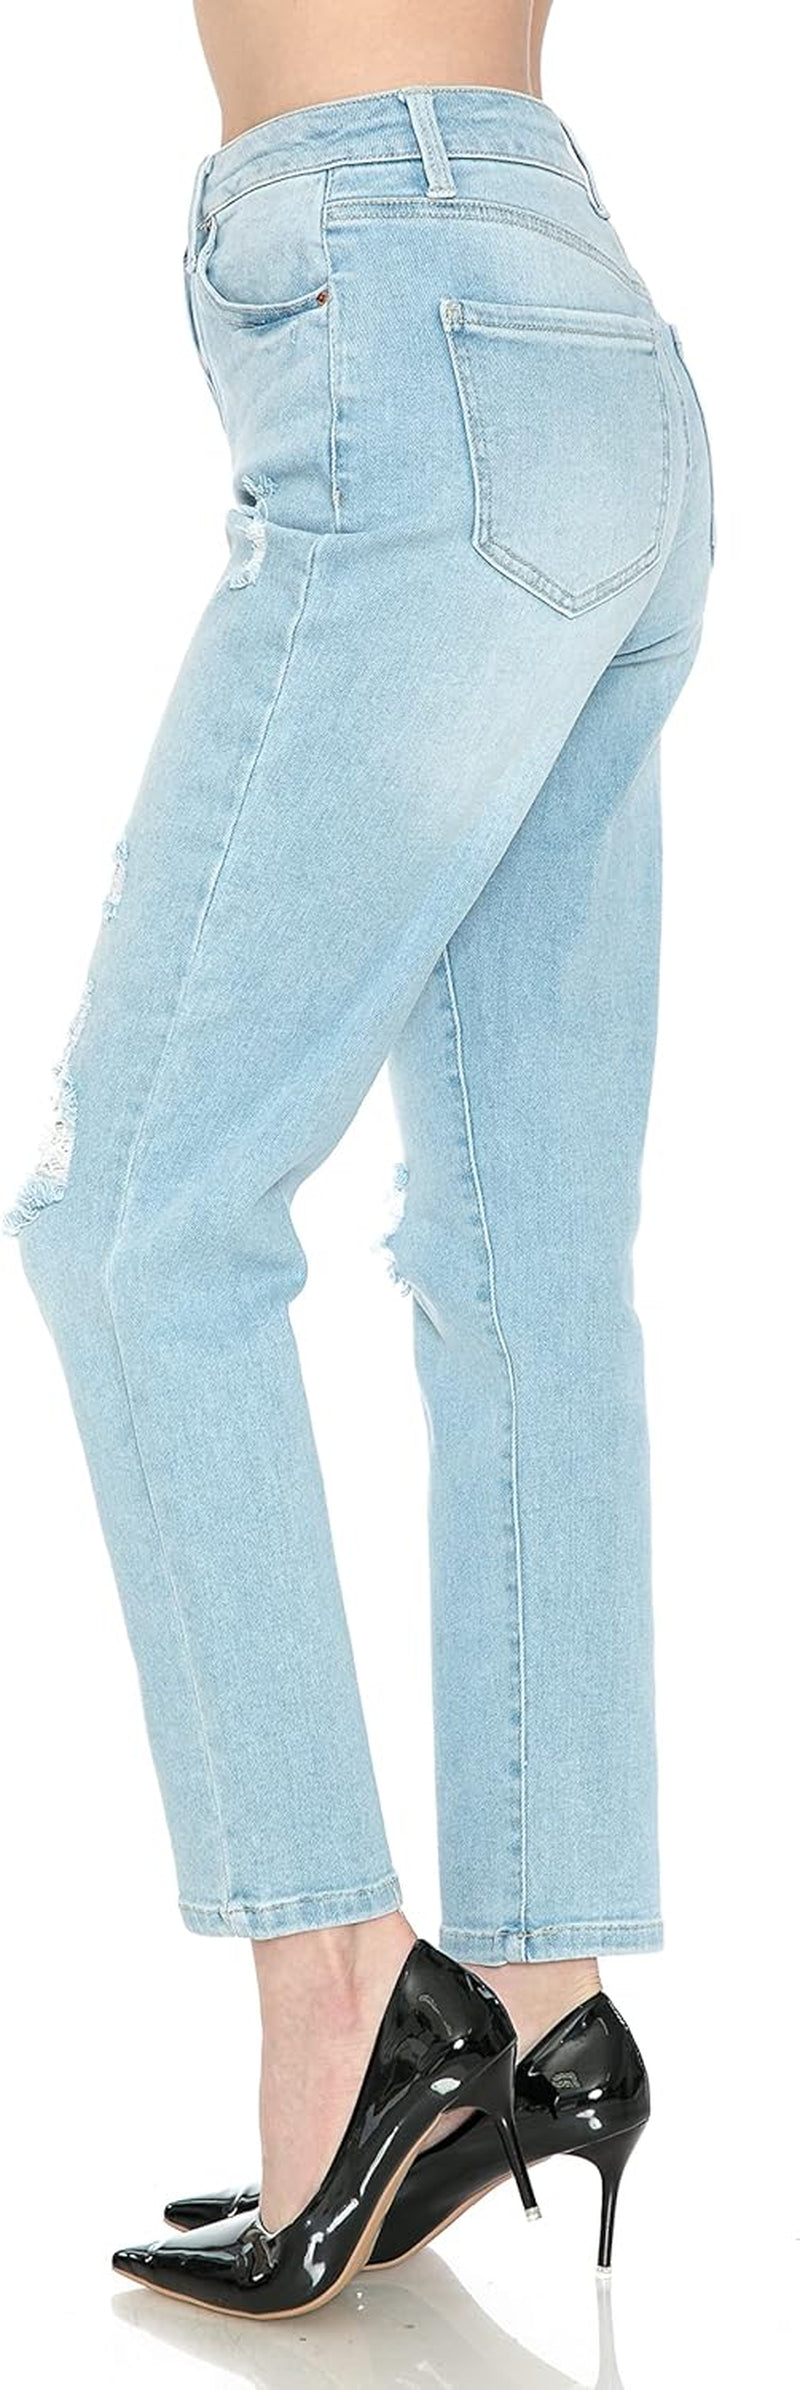 "Ultimate Comfort and Style: Women'S High Waisted Mom Jeans - Trendy Baggy Fit, Distressed Boyfriend Look, and Wide Range of Sizes!"